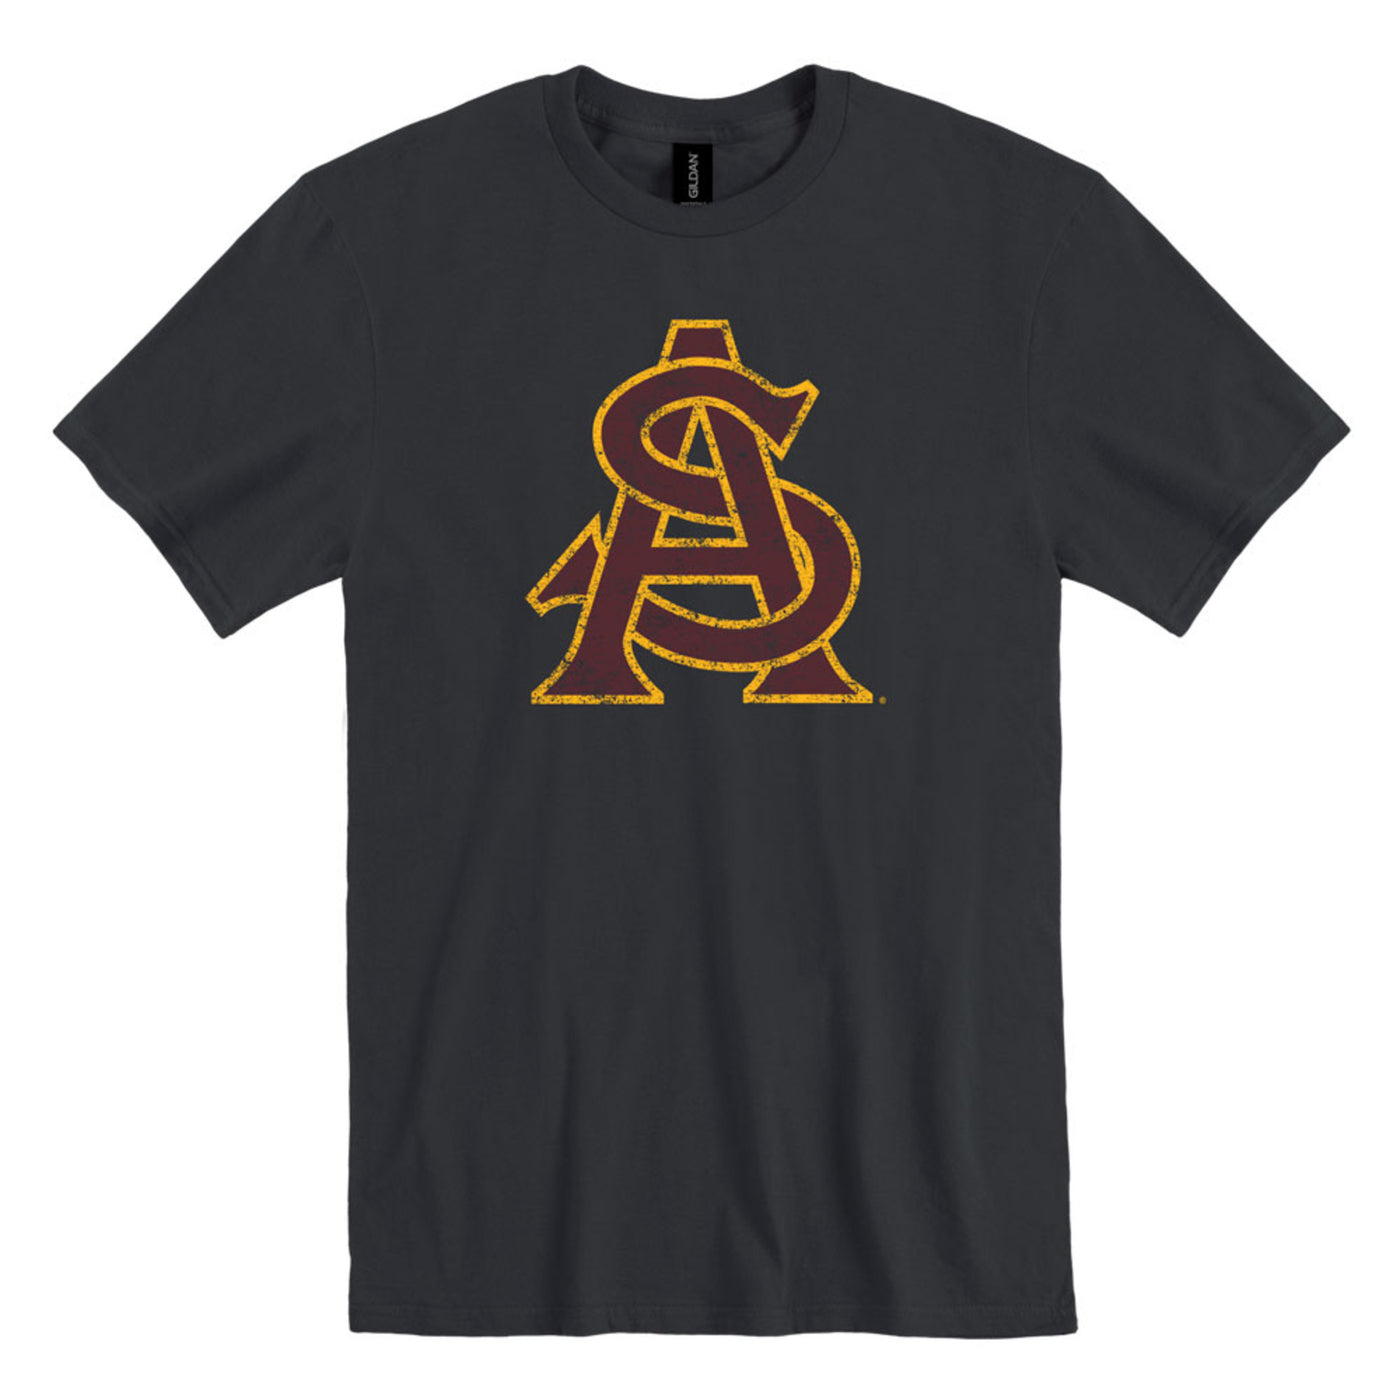 ASU black shirt with the interlocking A&S logo in maroon outlined in gold.